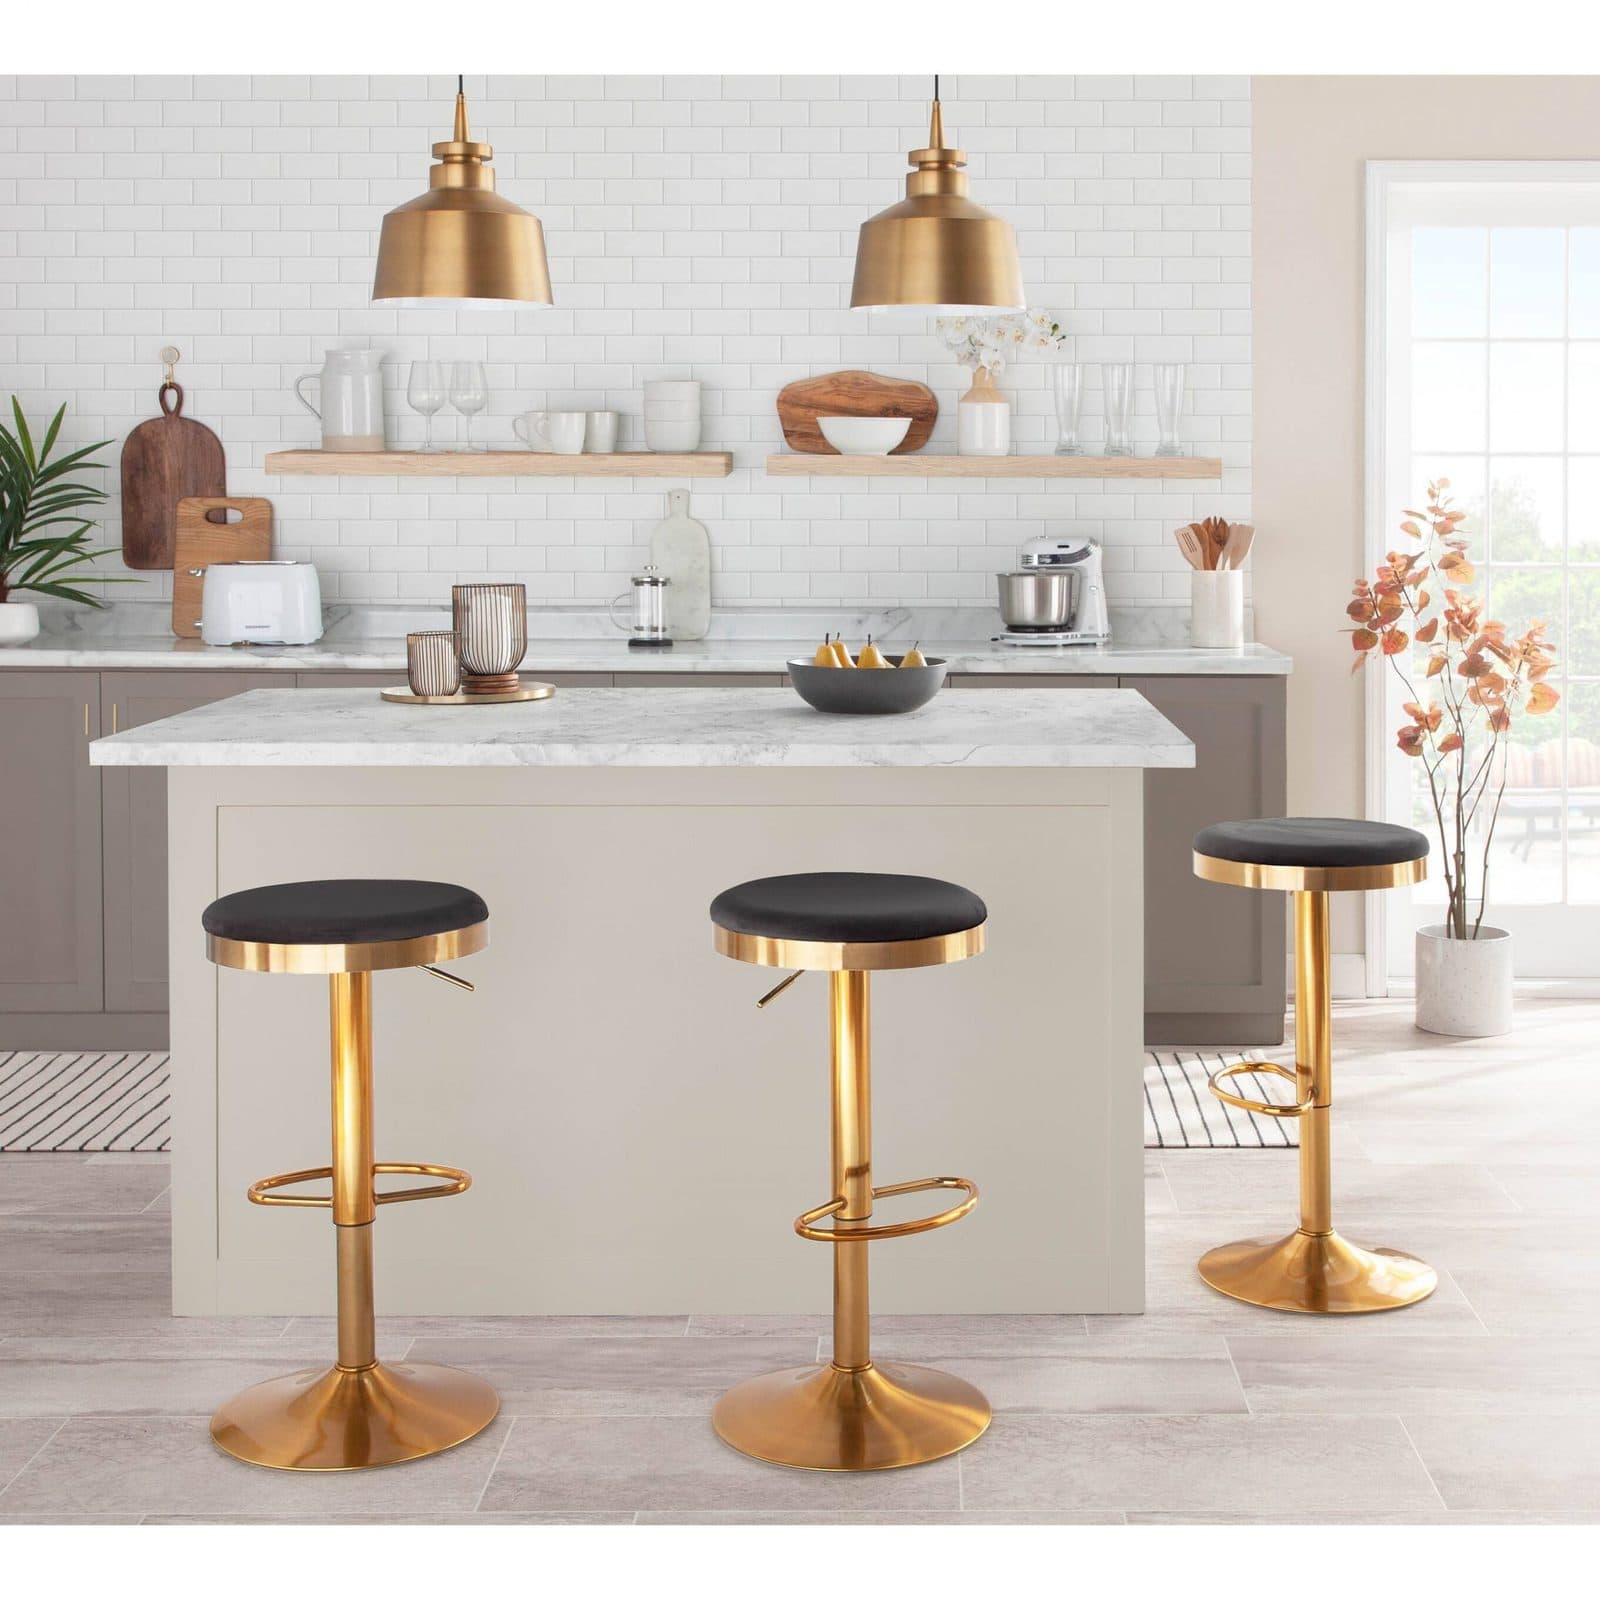 15 Best Stools For Kitchen Island, How To Choose Kitchen Island Stools